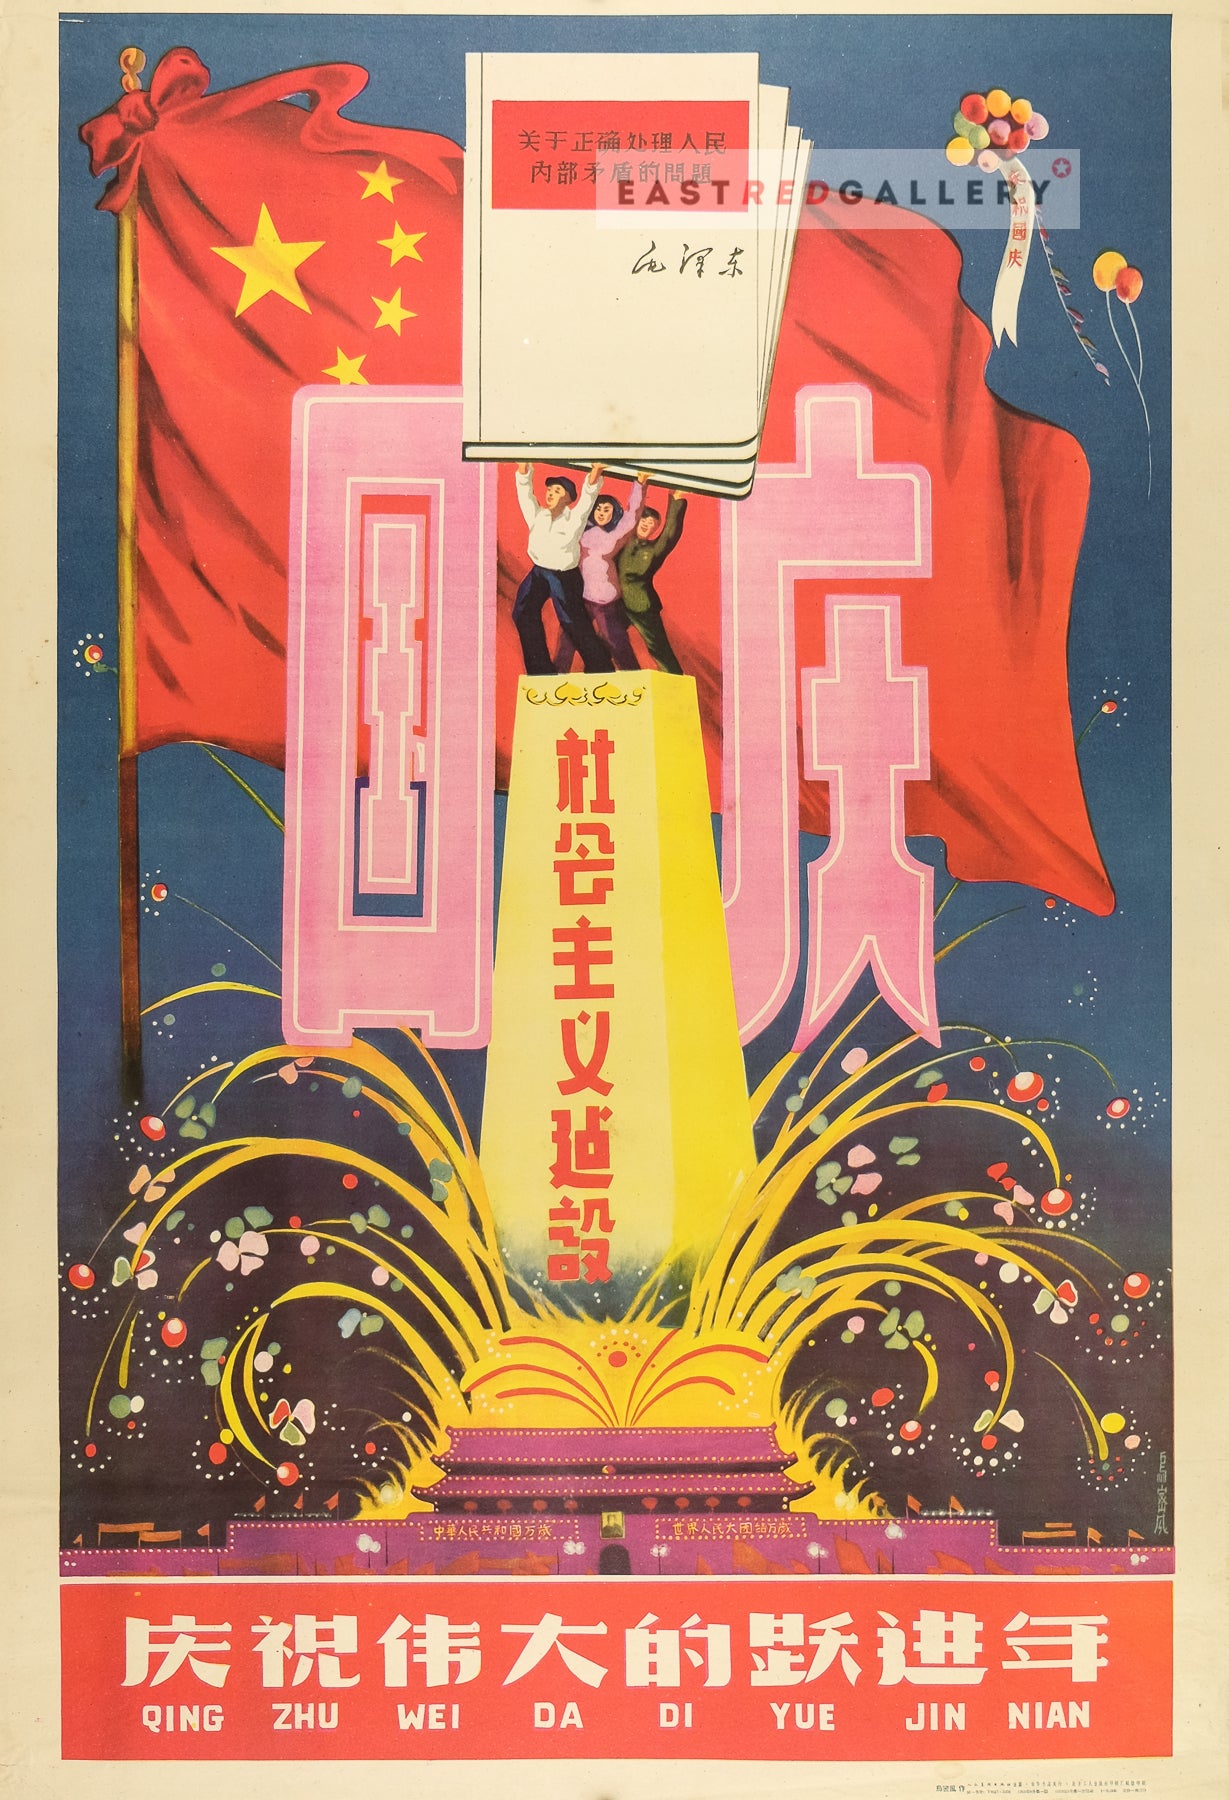 image of 1958 Chinese poster Celebrate the year of the mighty Leap Forward